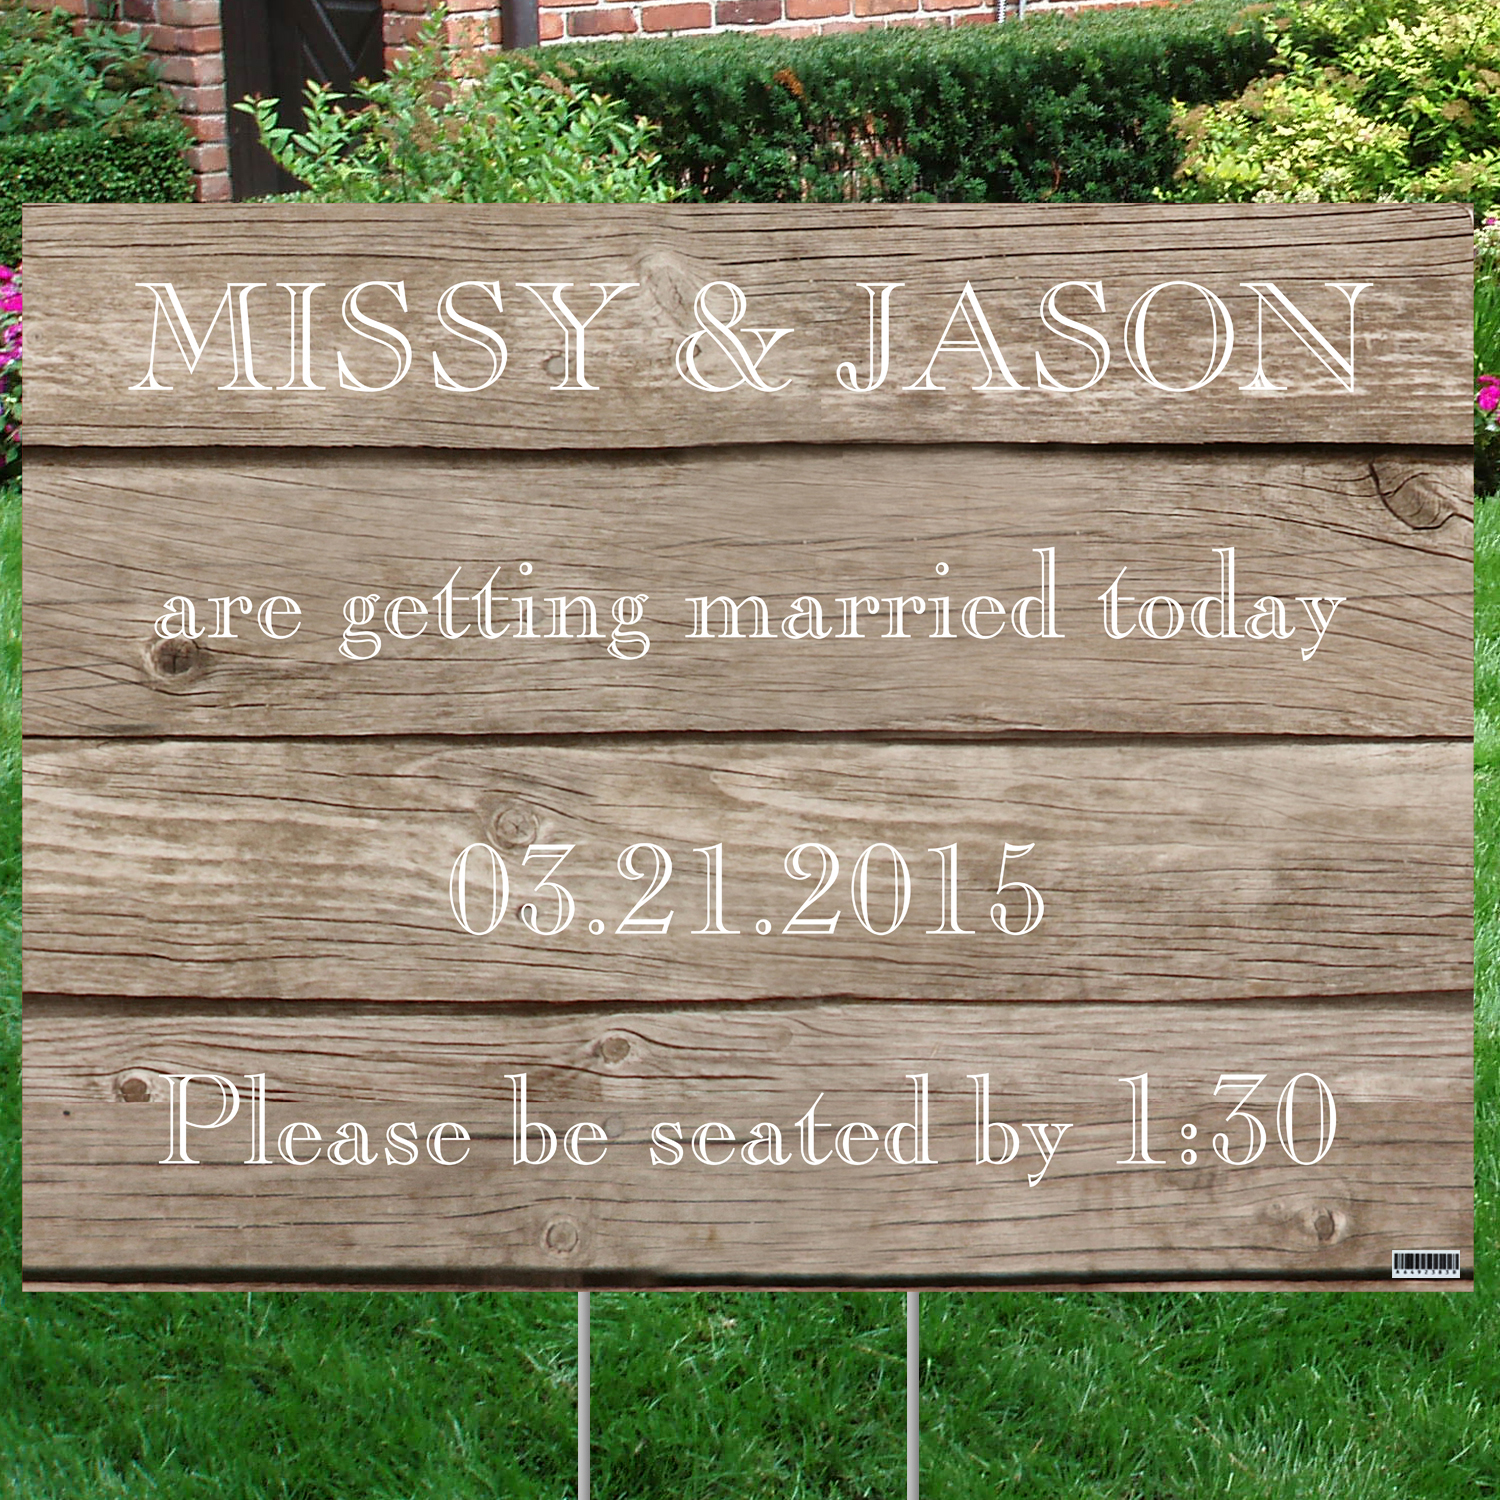 wood yard grain sign signs wedding openface caslon font featuring